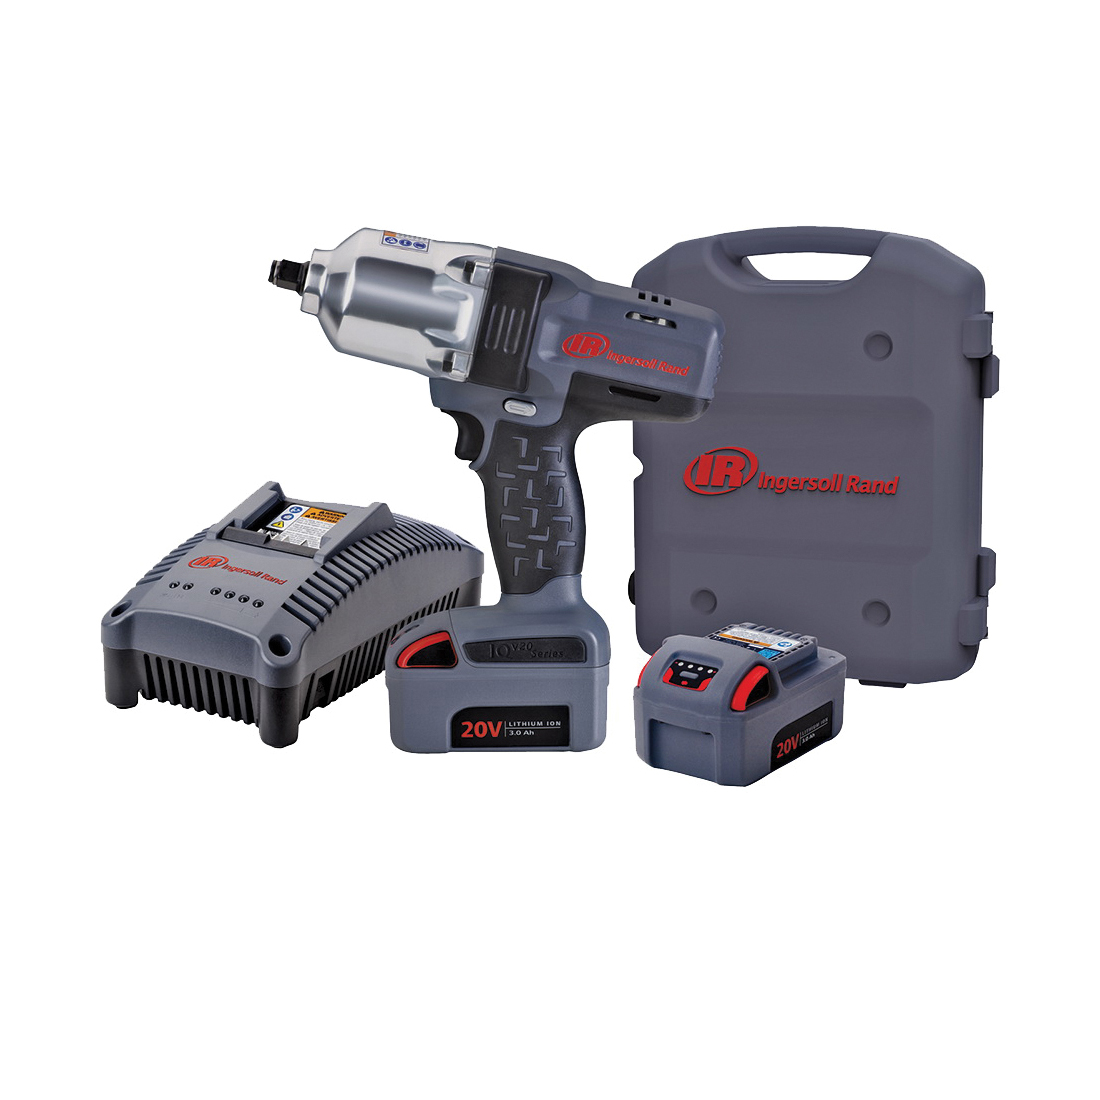 W7150-K2 Impact Wrench Kit, Battery Included, 20 V, 3 Ah, 1/2 in Drive, Square Drive, 2300 ipm